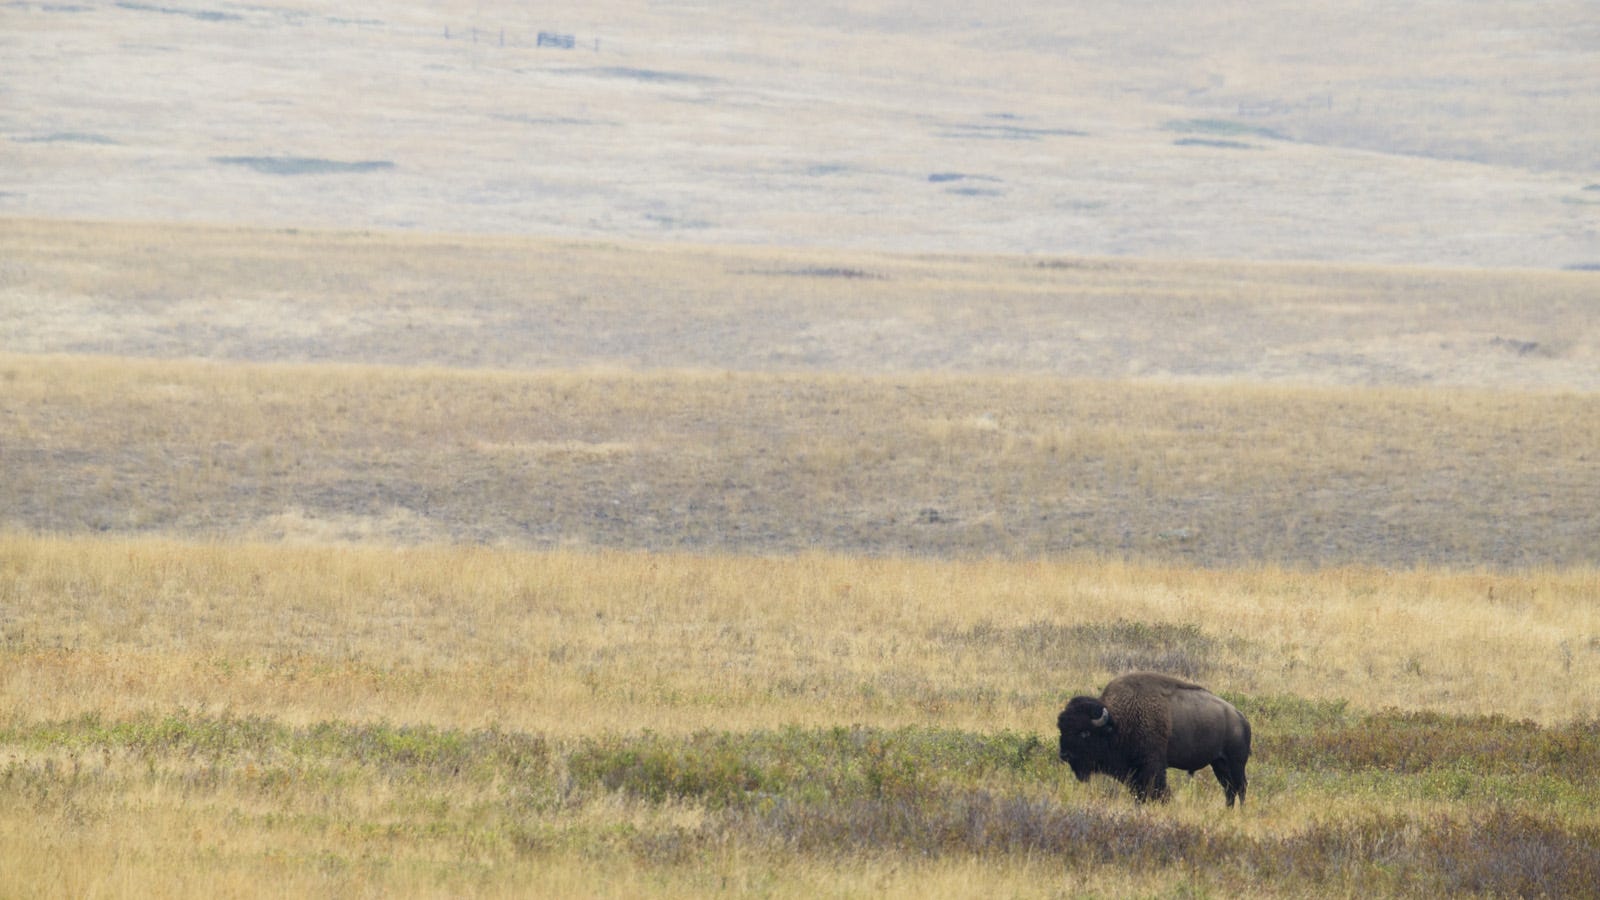 A bison stands out in a field with rolling hills